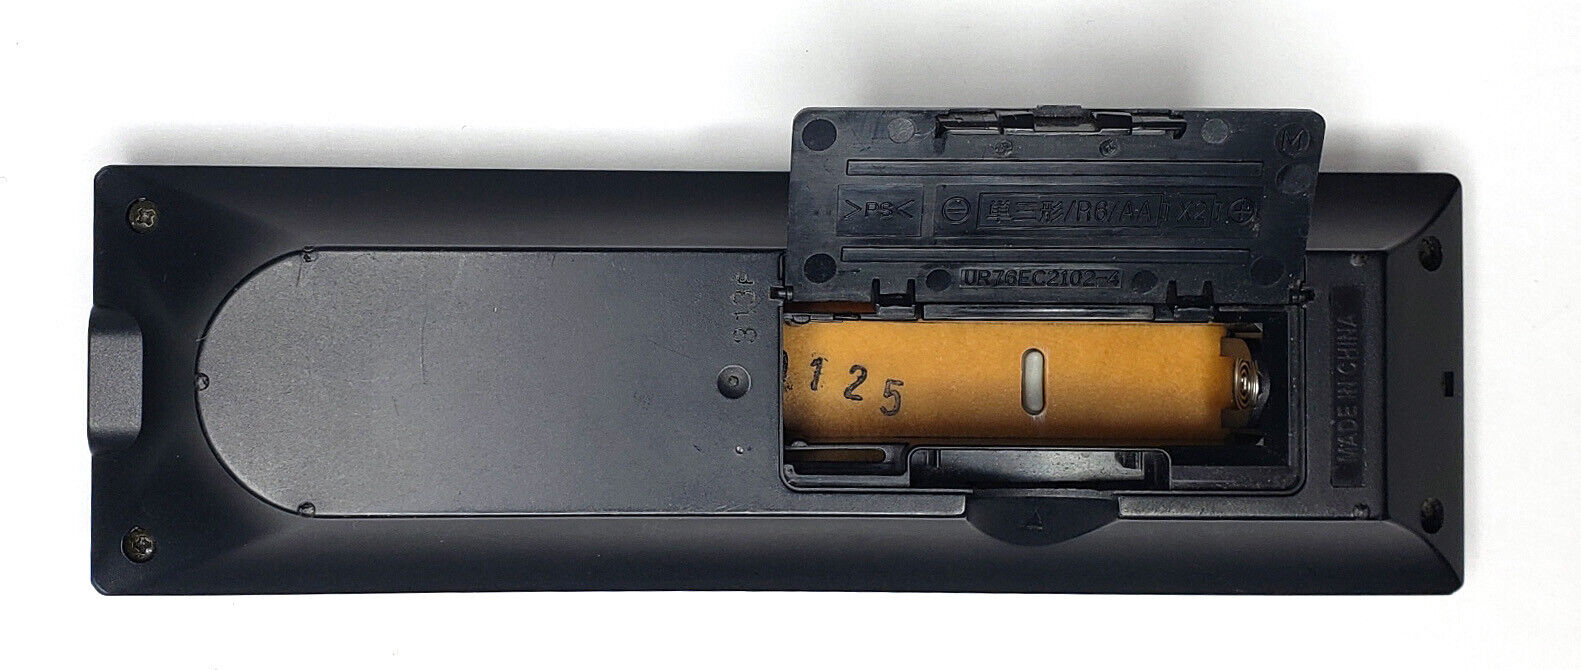 Panasonic EUR7621010 Remote Control for DVD Players - Battery Compartment